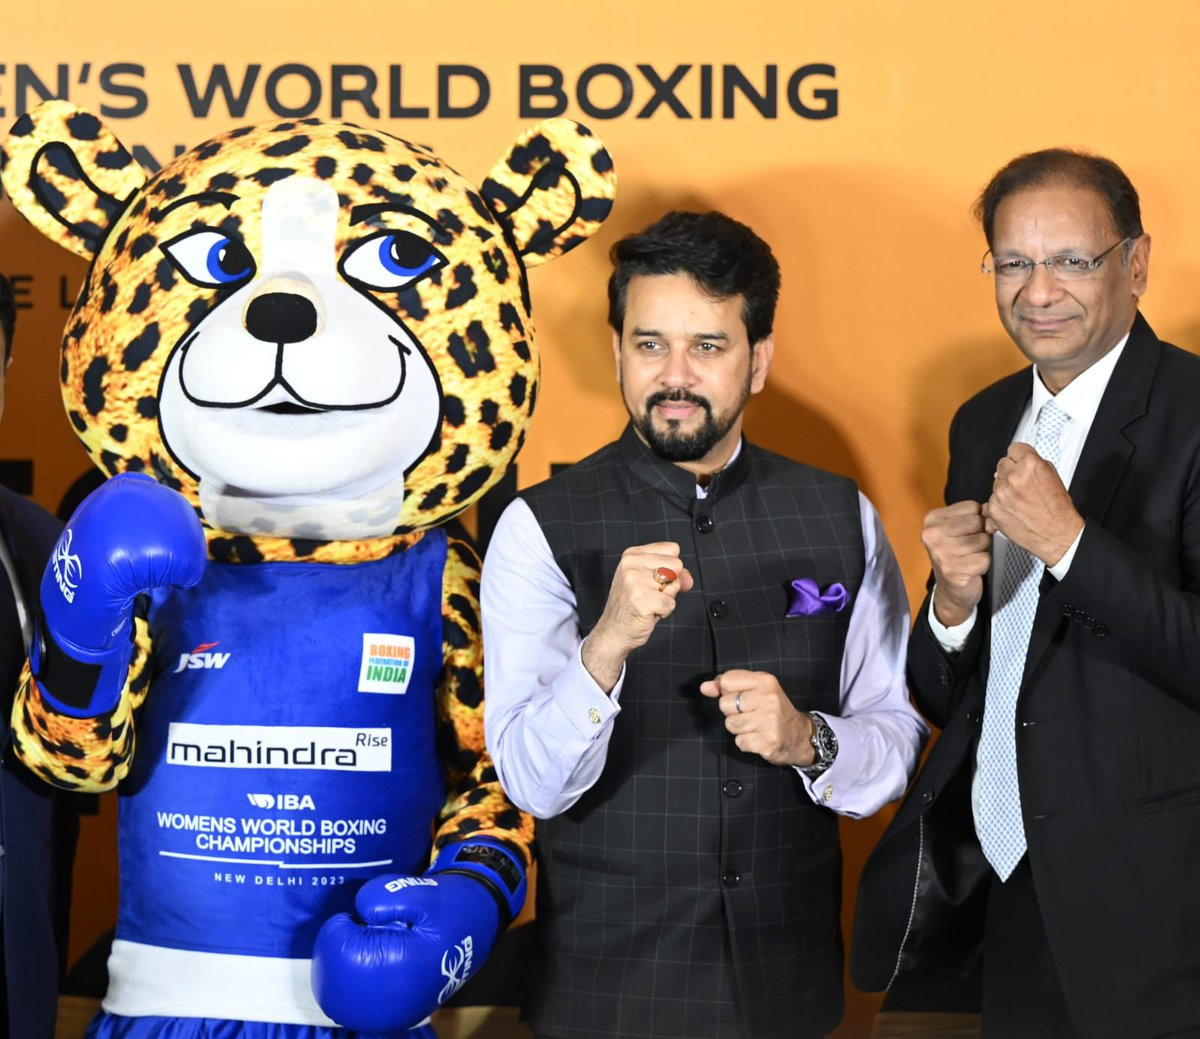 Boxing Federation of India President Ajay Singh, right, has claimed the IOC will attend the IBA Women's World Boxing Championships in New Delhi, despite the current poor relations between the two organisations ©BFI